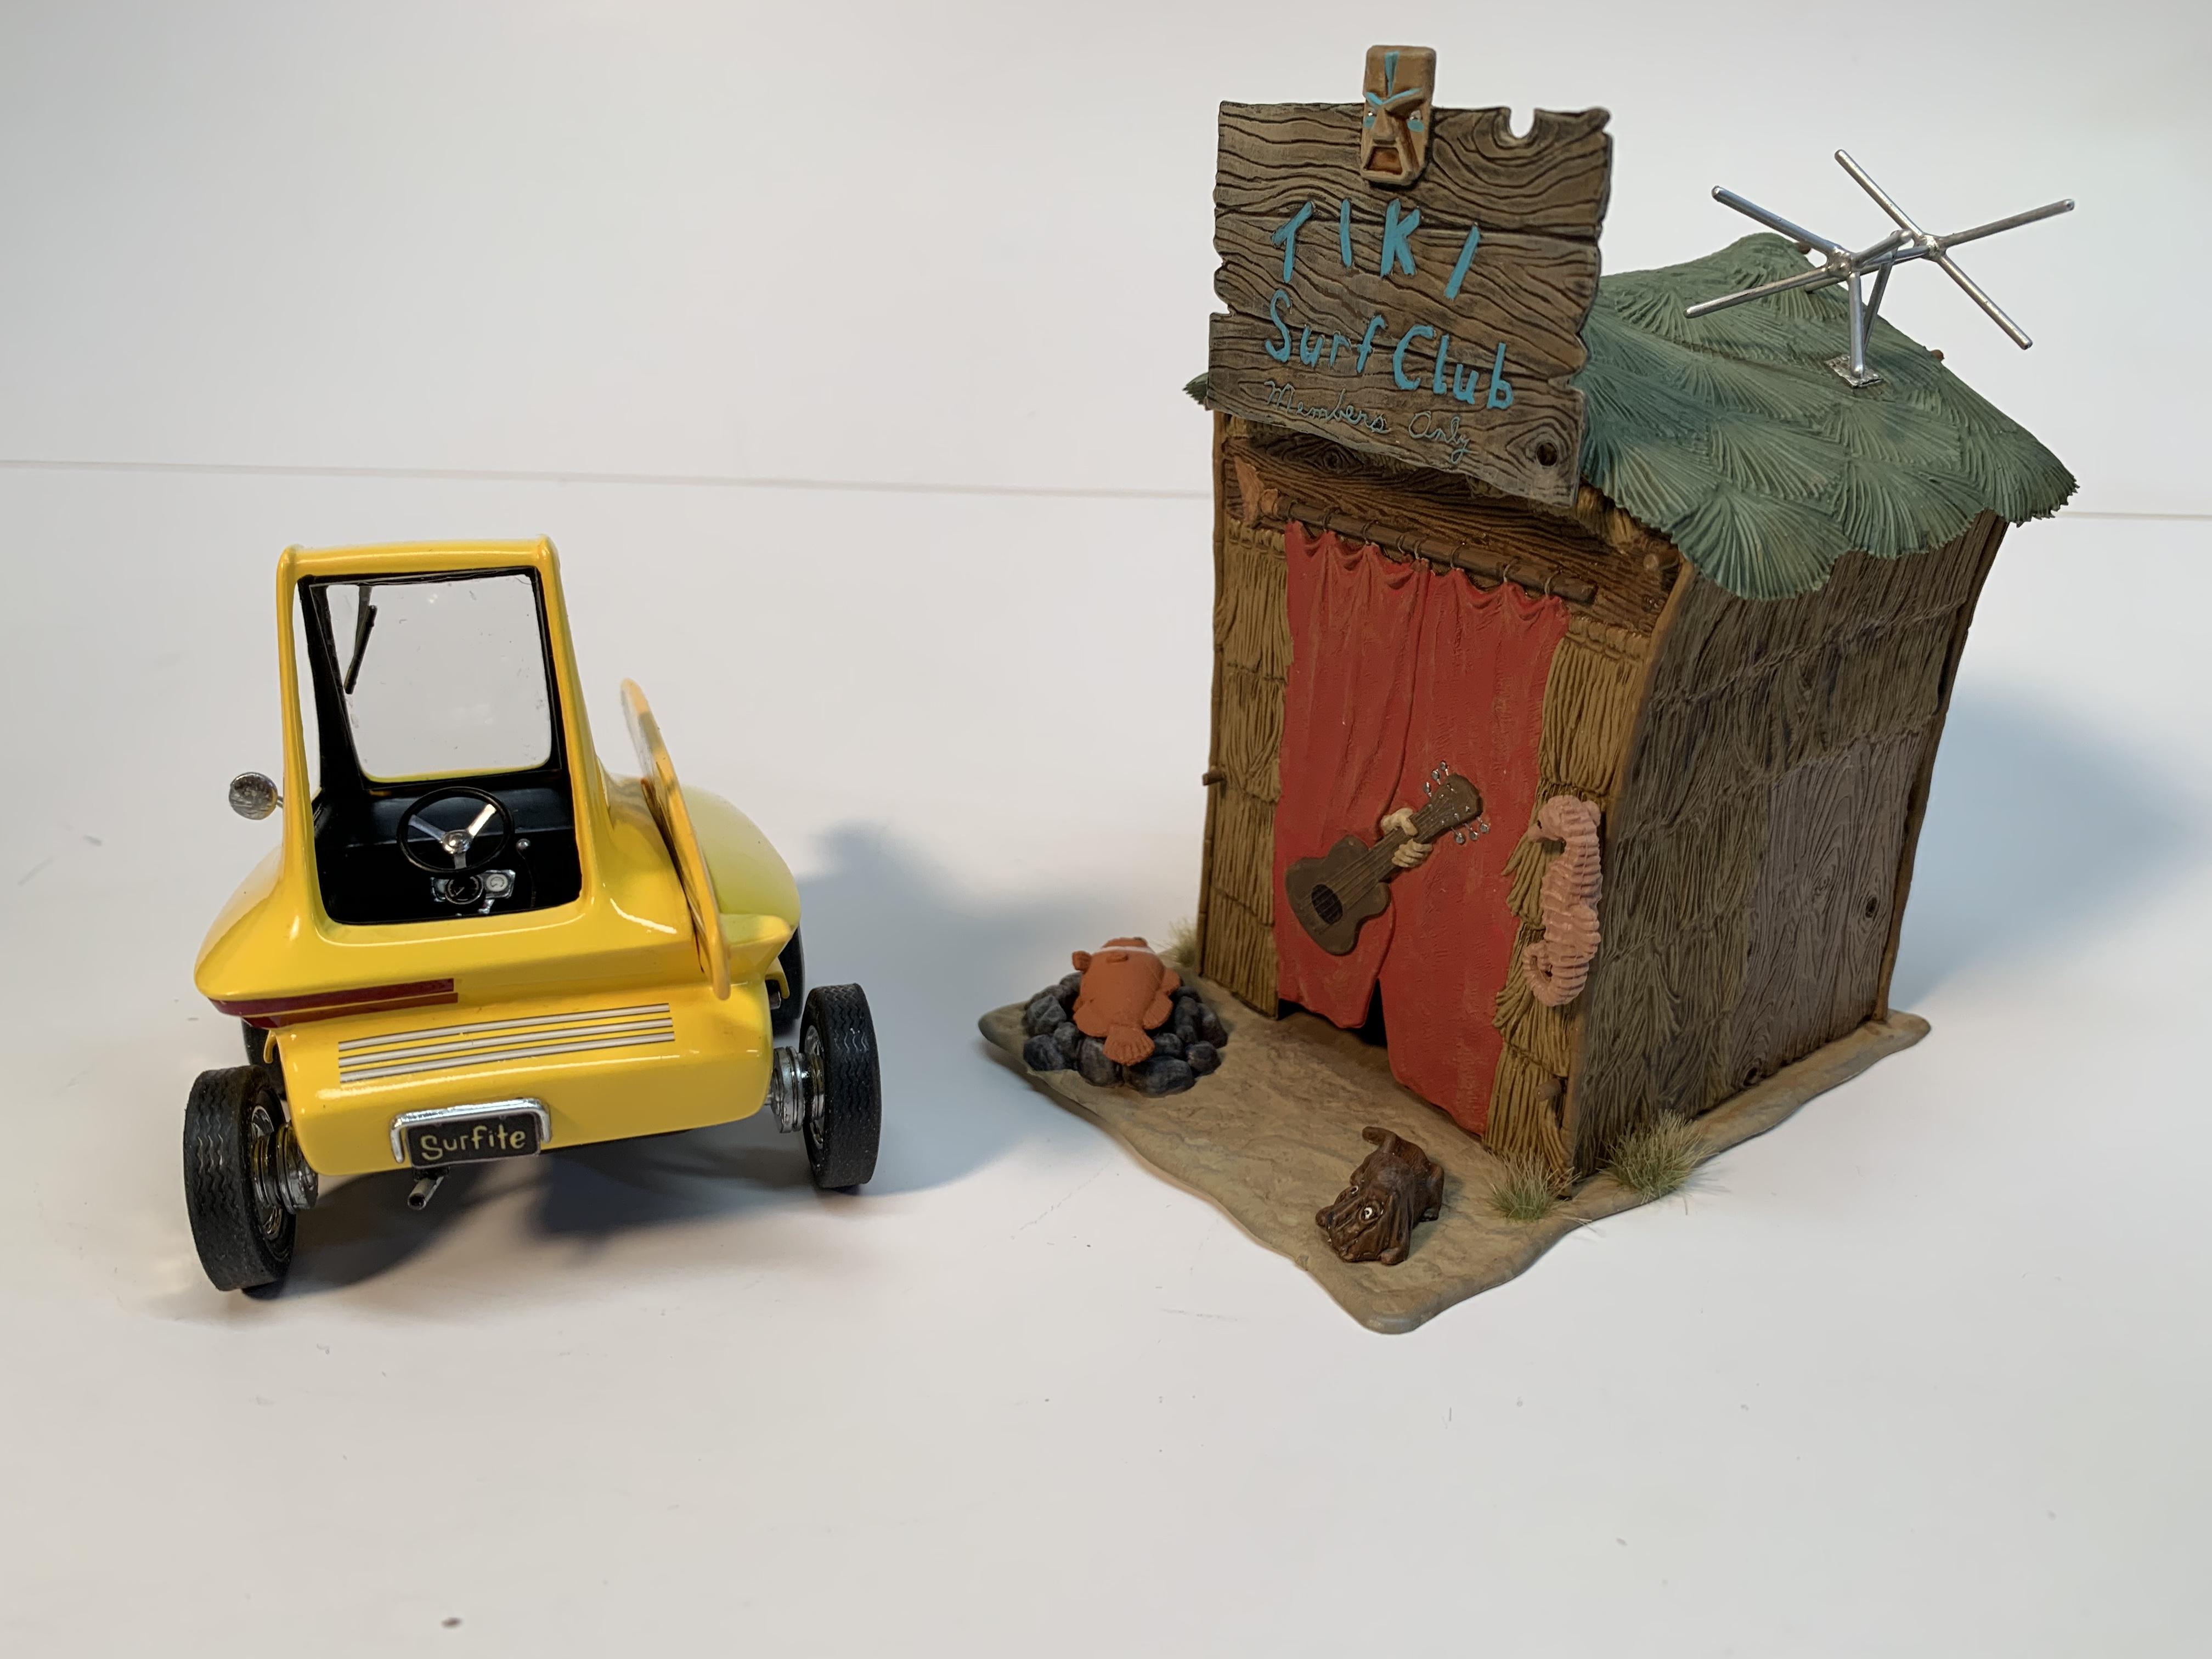 Surfite and Tiki hut by Ed Roth - Model Cars - Model Cars Magazine